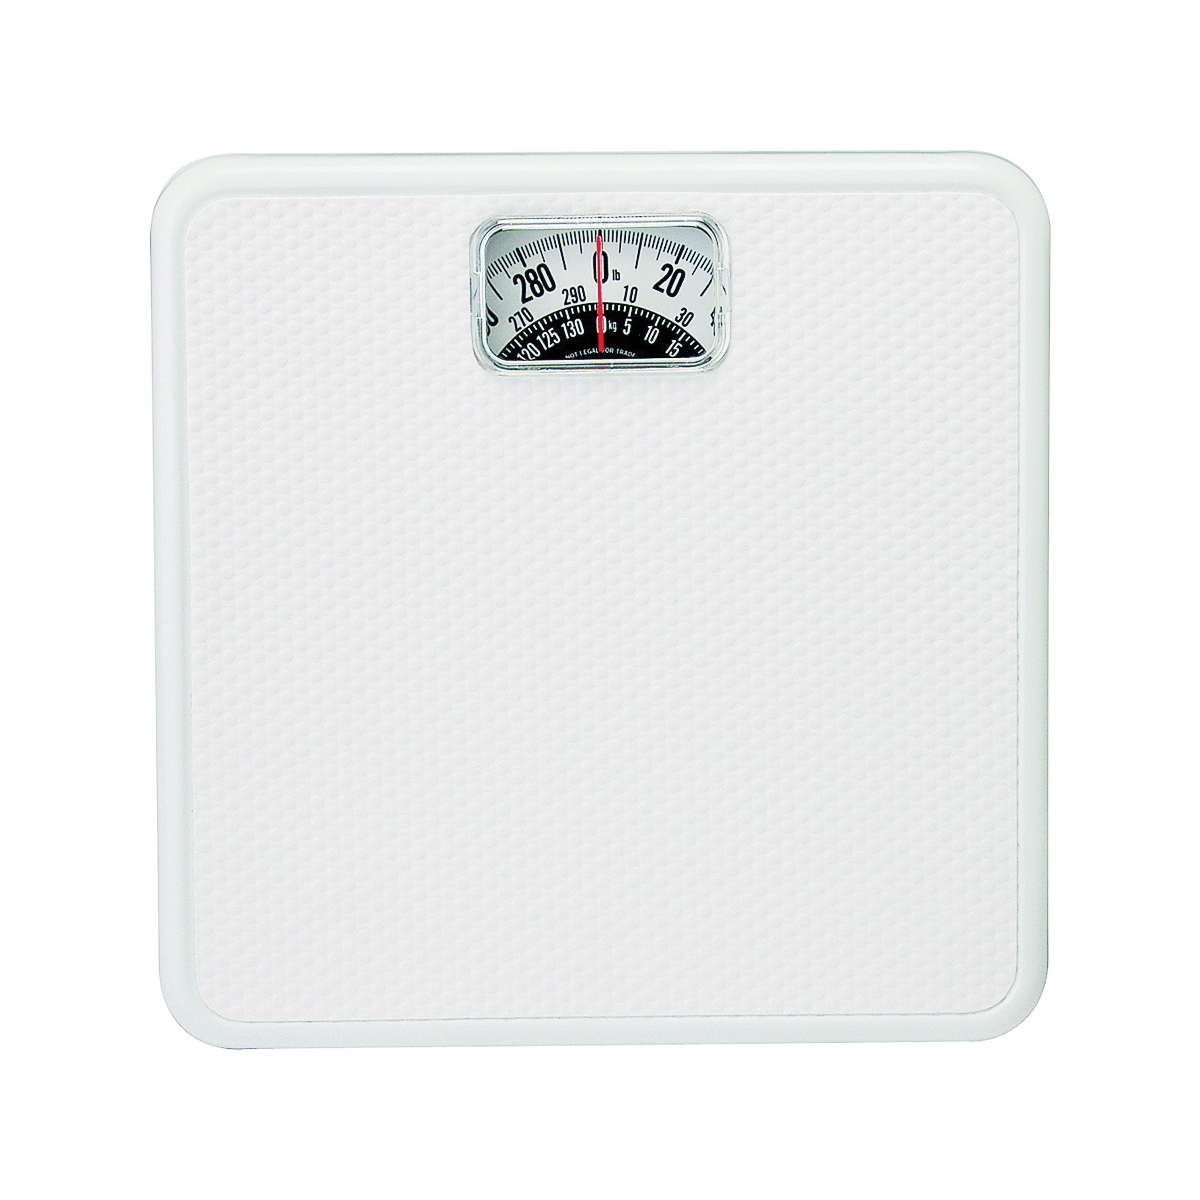 20005014T Bathroom Scale, 300 lb Capacity, Analog Display, White, 10-3/4 in OAW, 10.3 in OAD, 1.8 in OAH